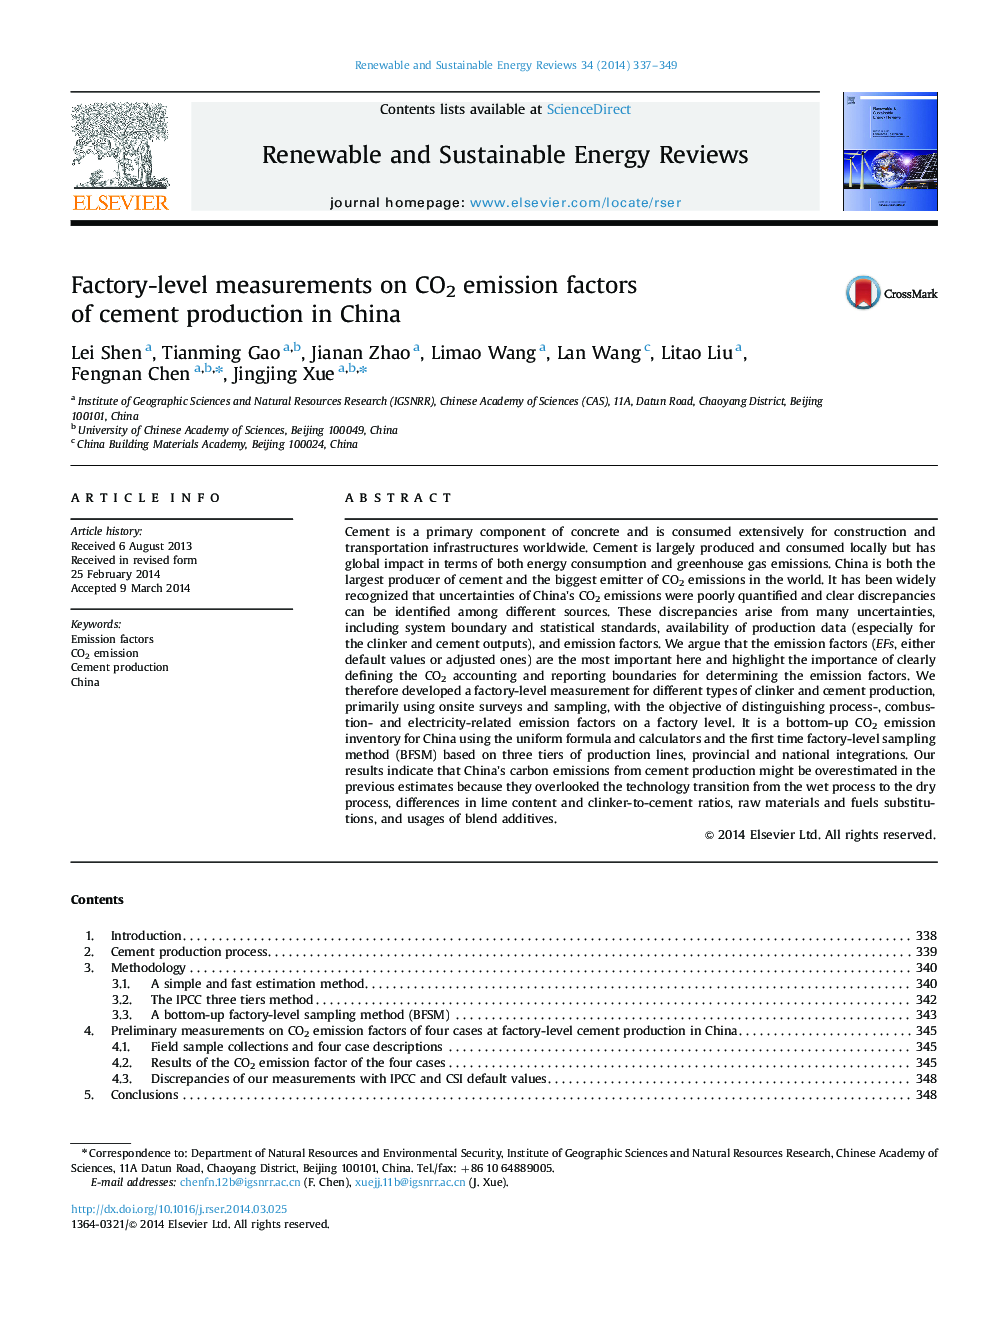 Factory-level measurements on CO2 emission factors of cement production in China